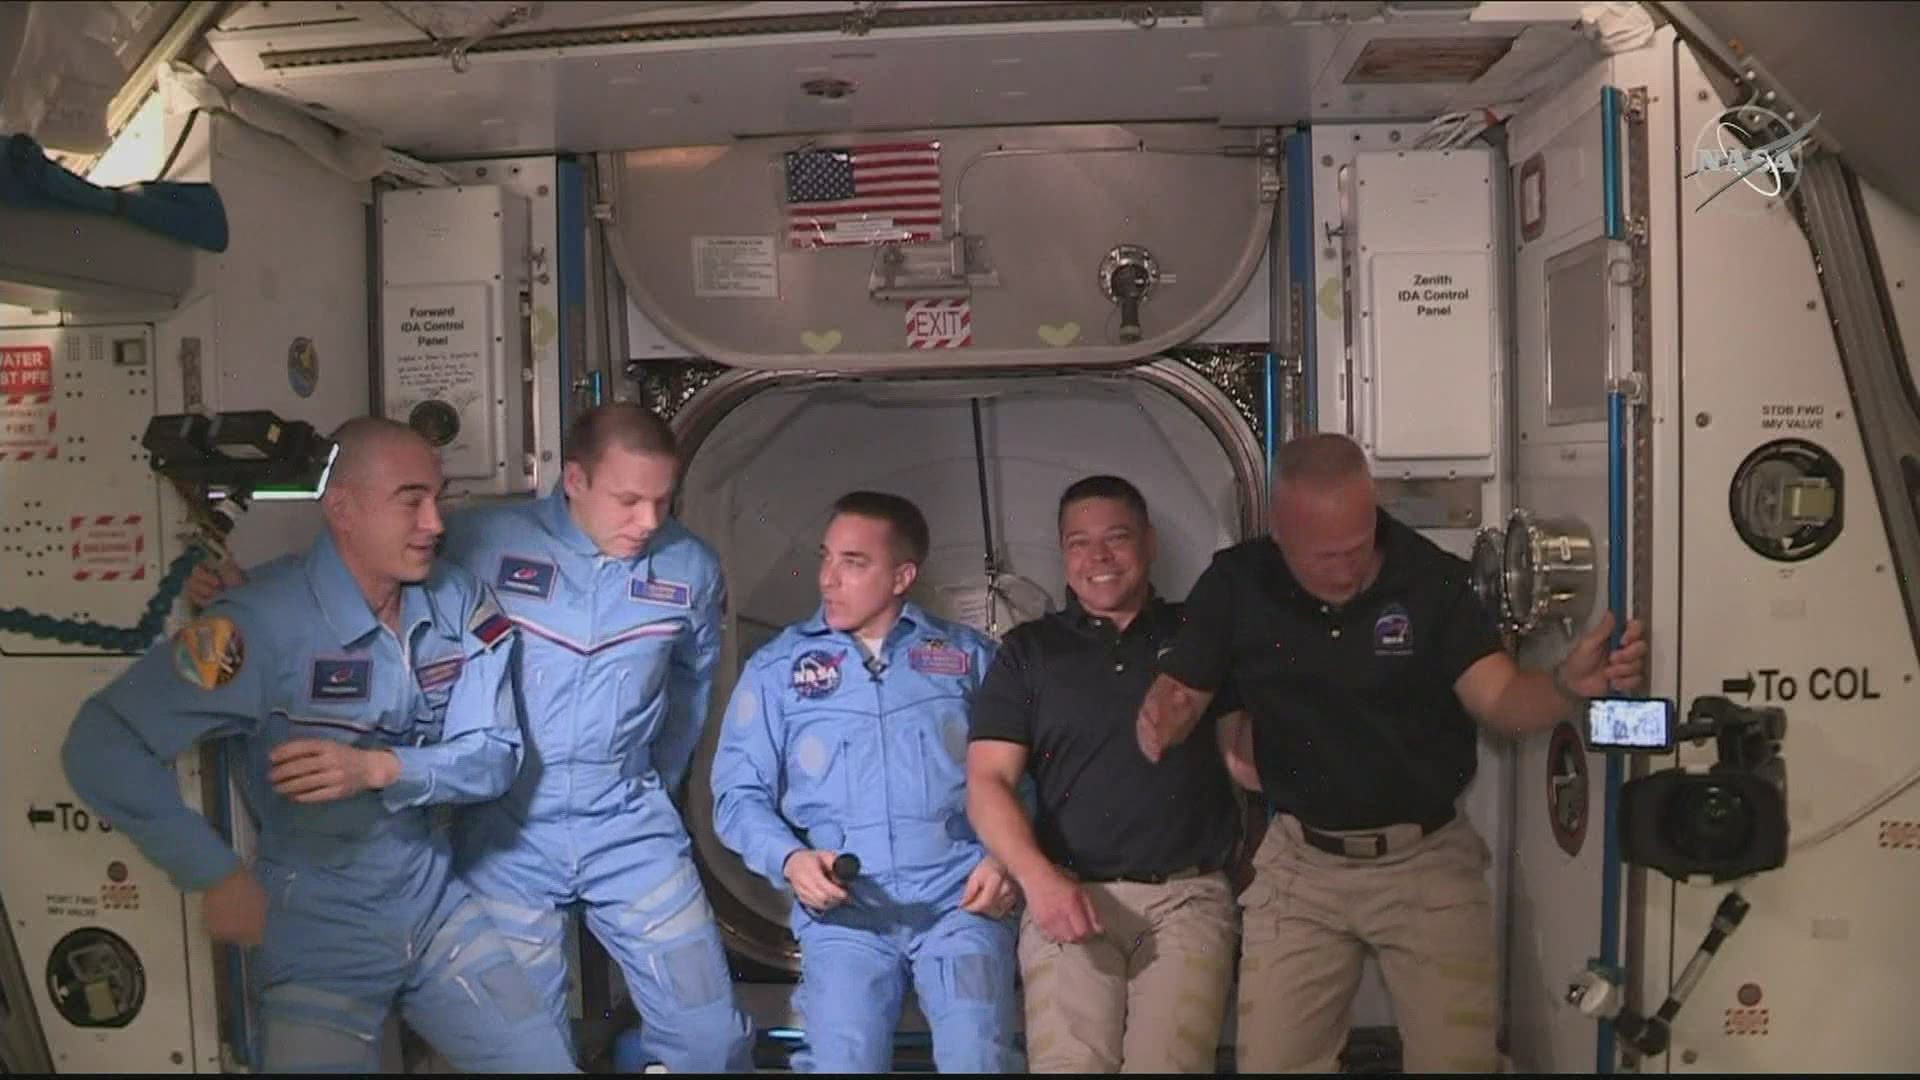 Two NASA astronauts and their SpaceX capsule docked at the international space station.